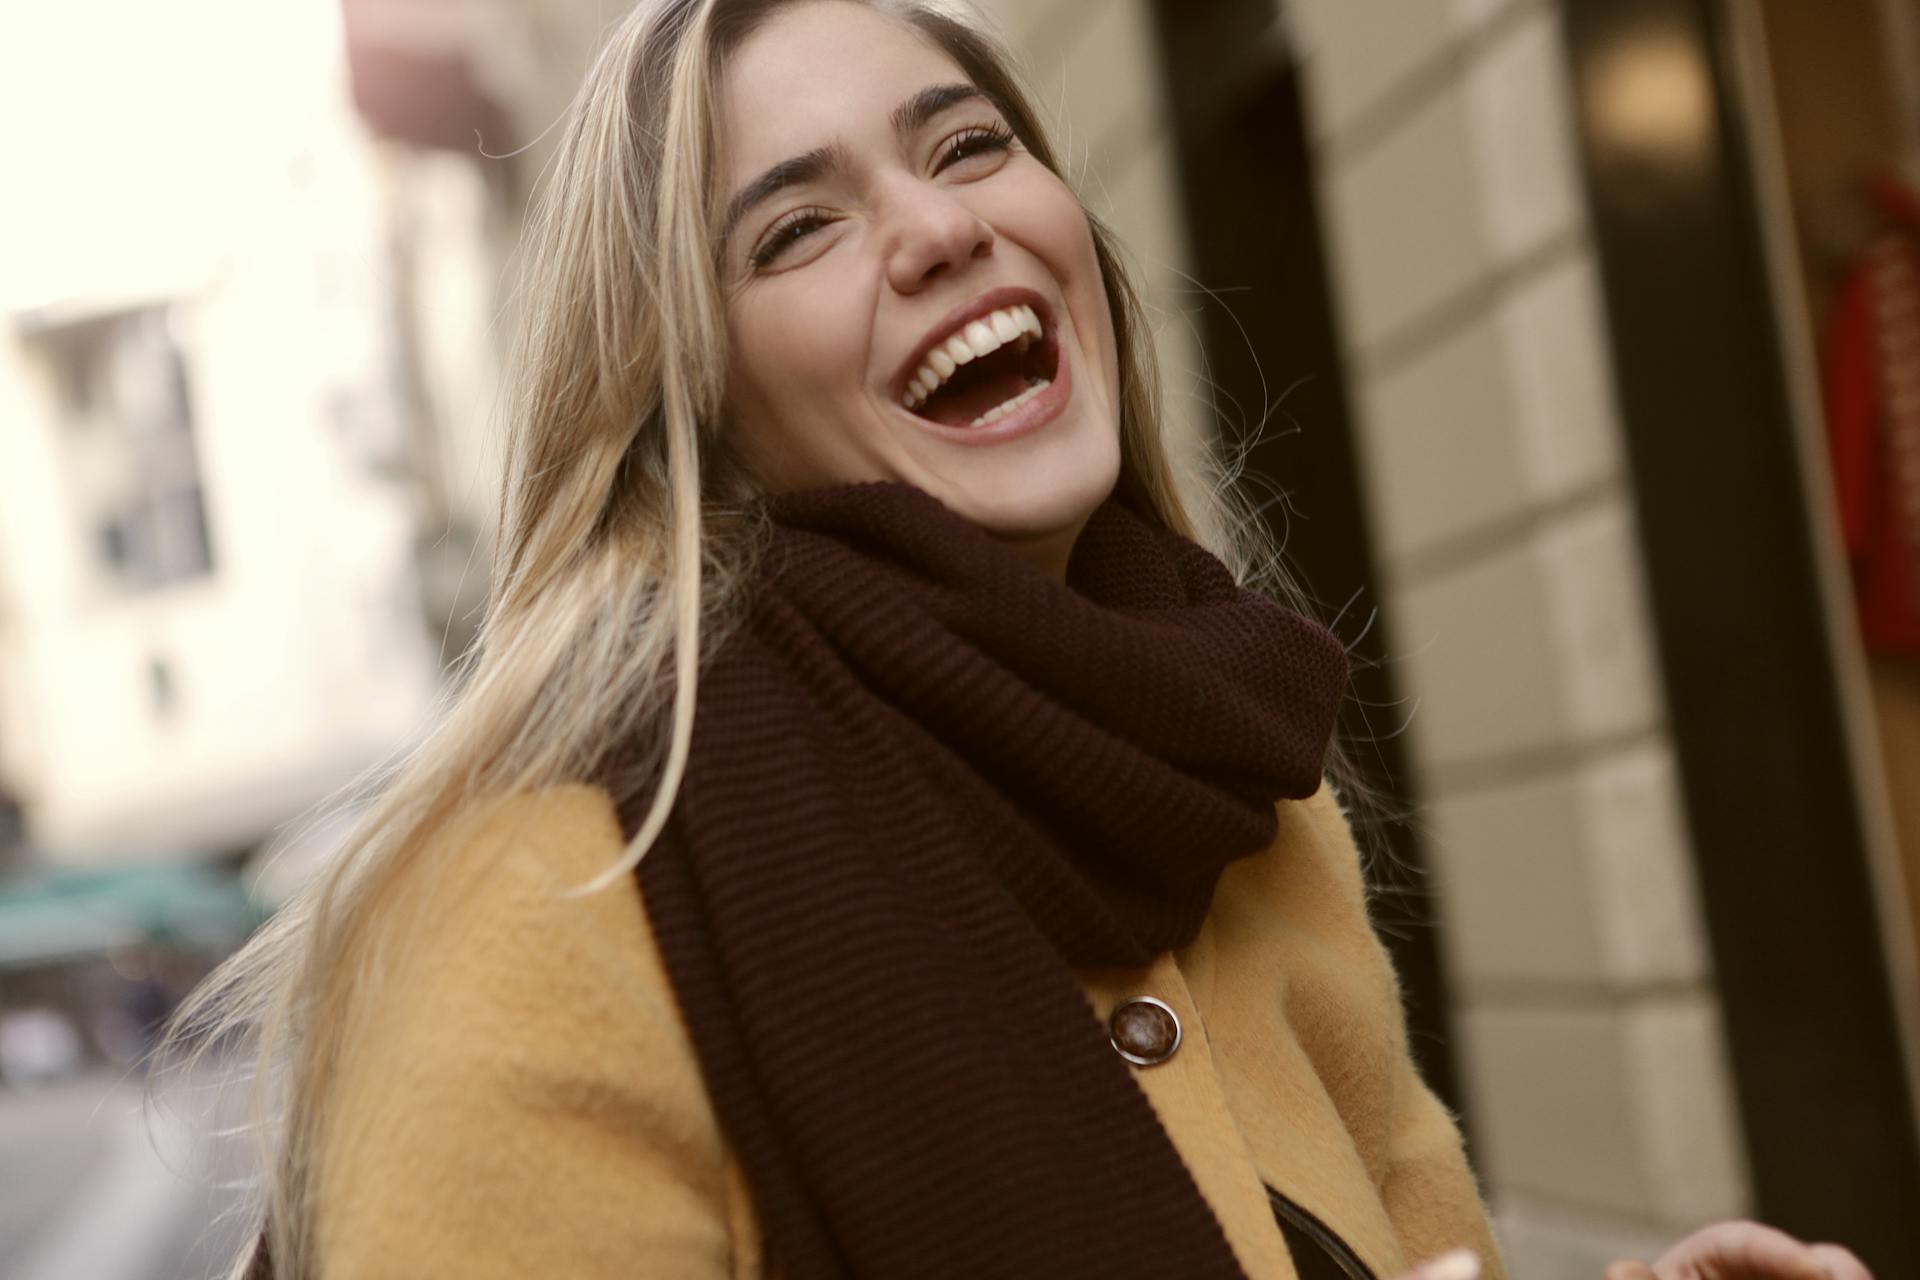 A woman laughing | Source: Pexels